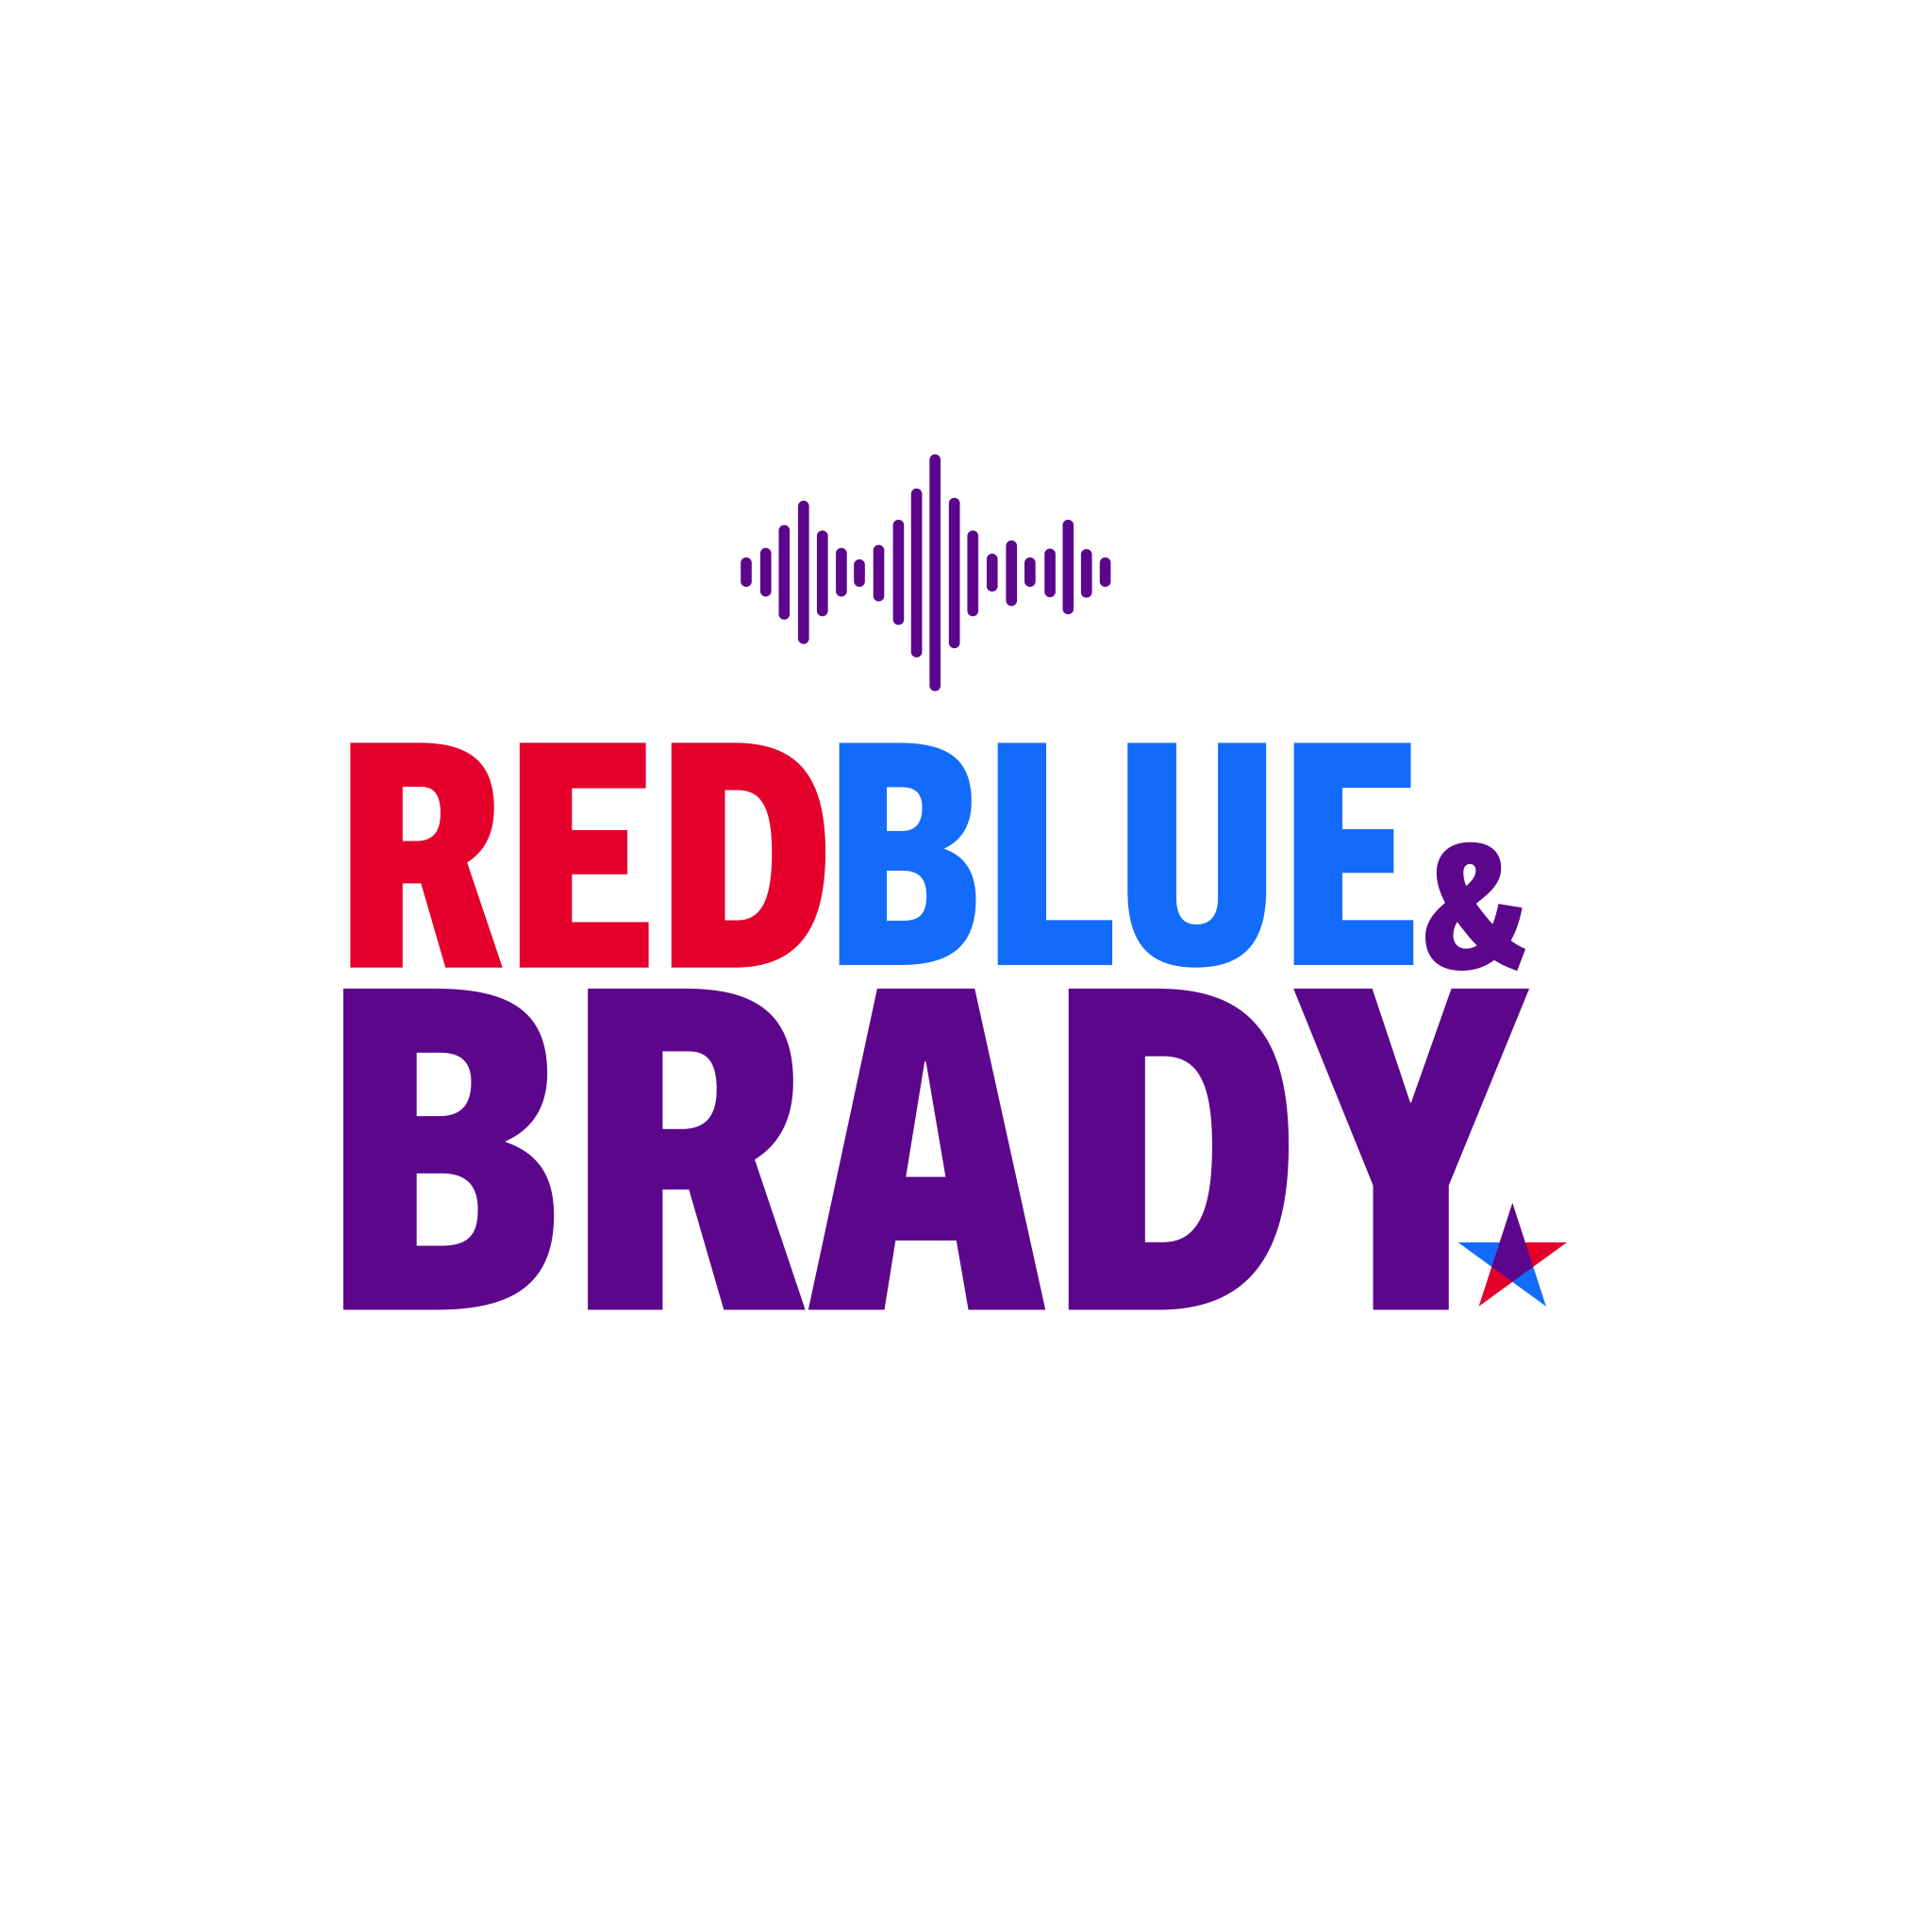 Red, Blue, and Brady